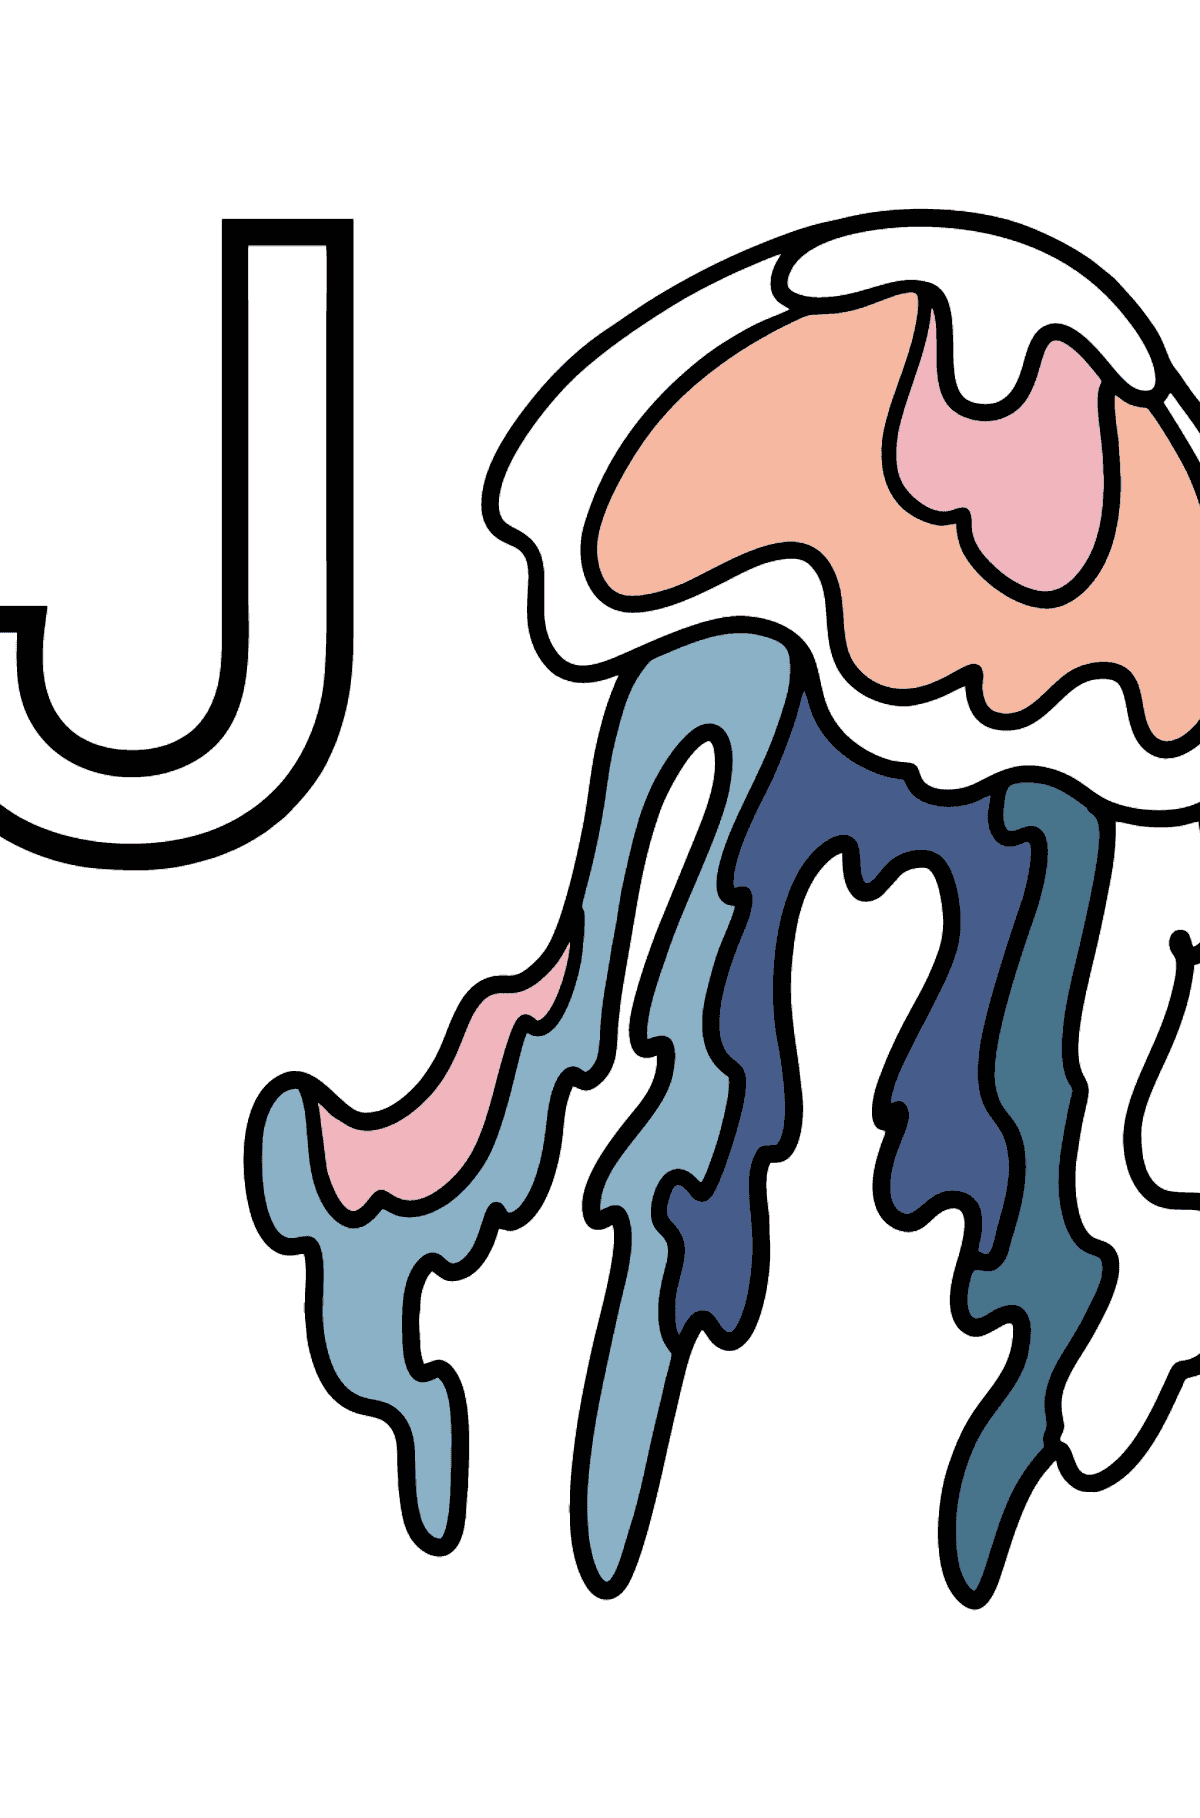 English Letter J coloring pages - JELLYFISH - Coloring Pages for Kids